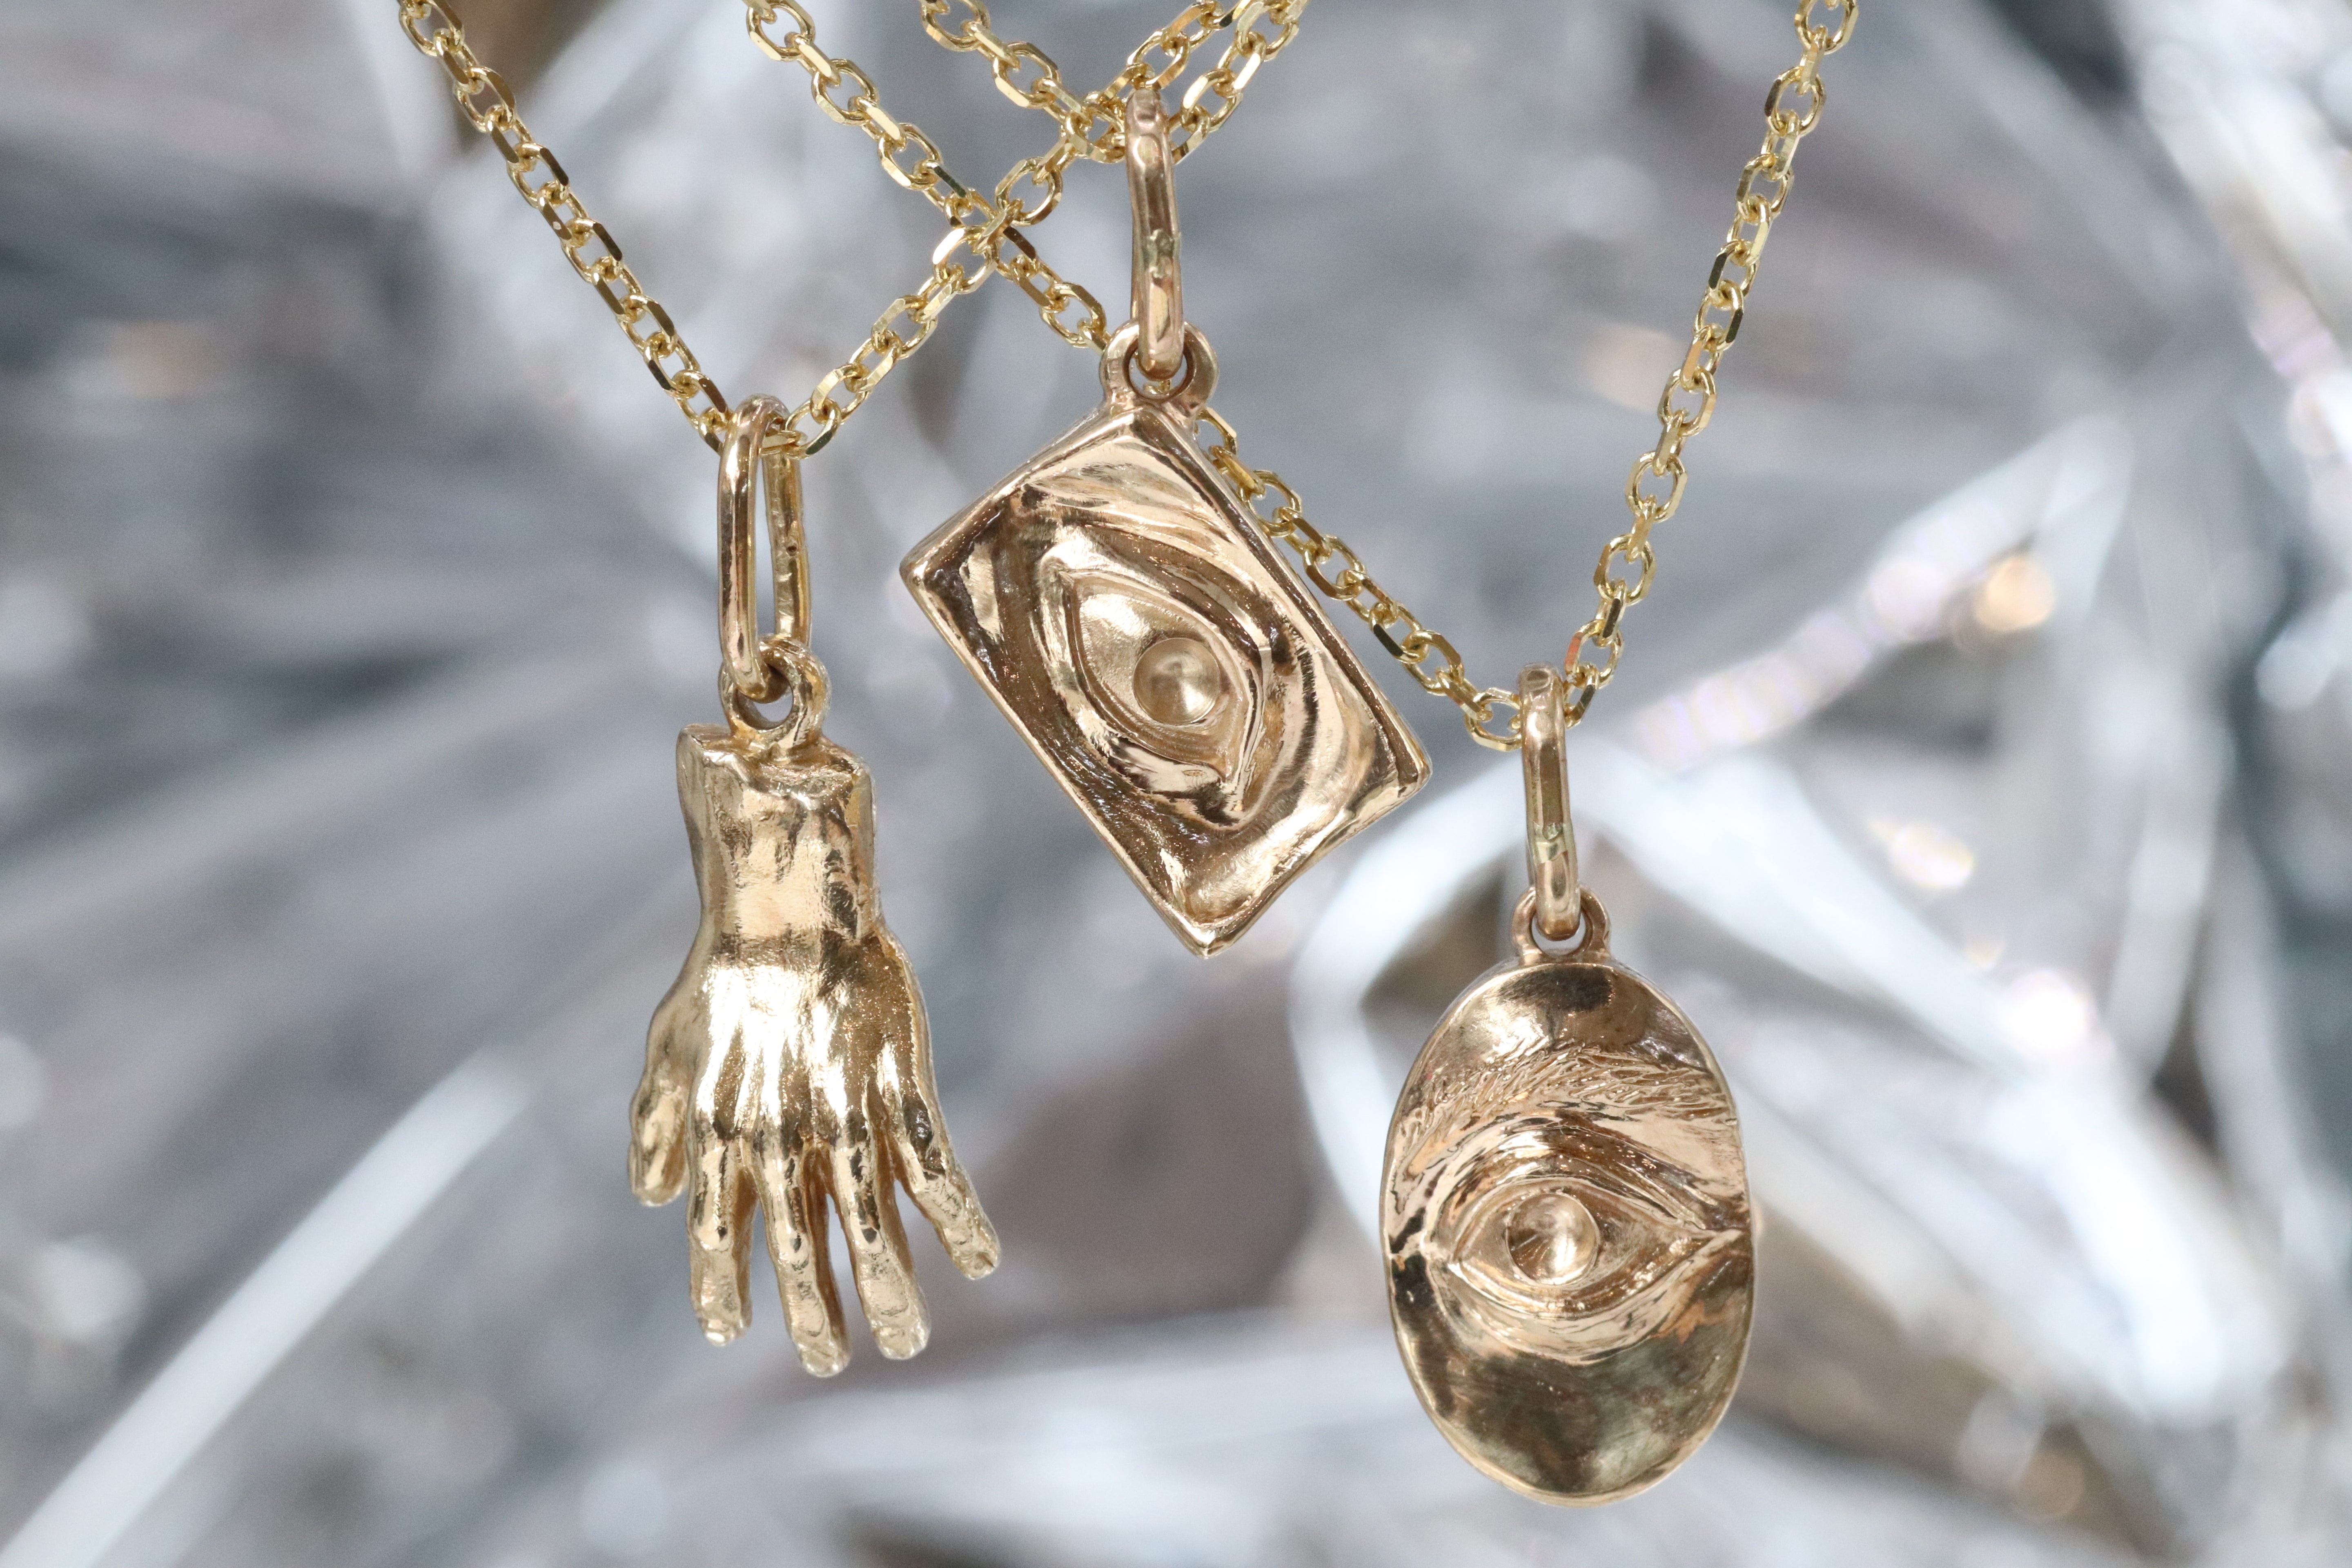 Group shout of showing back of the Theia Pendant, Intagliuax Oval Pendant, and Intagliuax Pendant